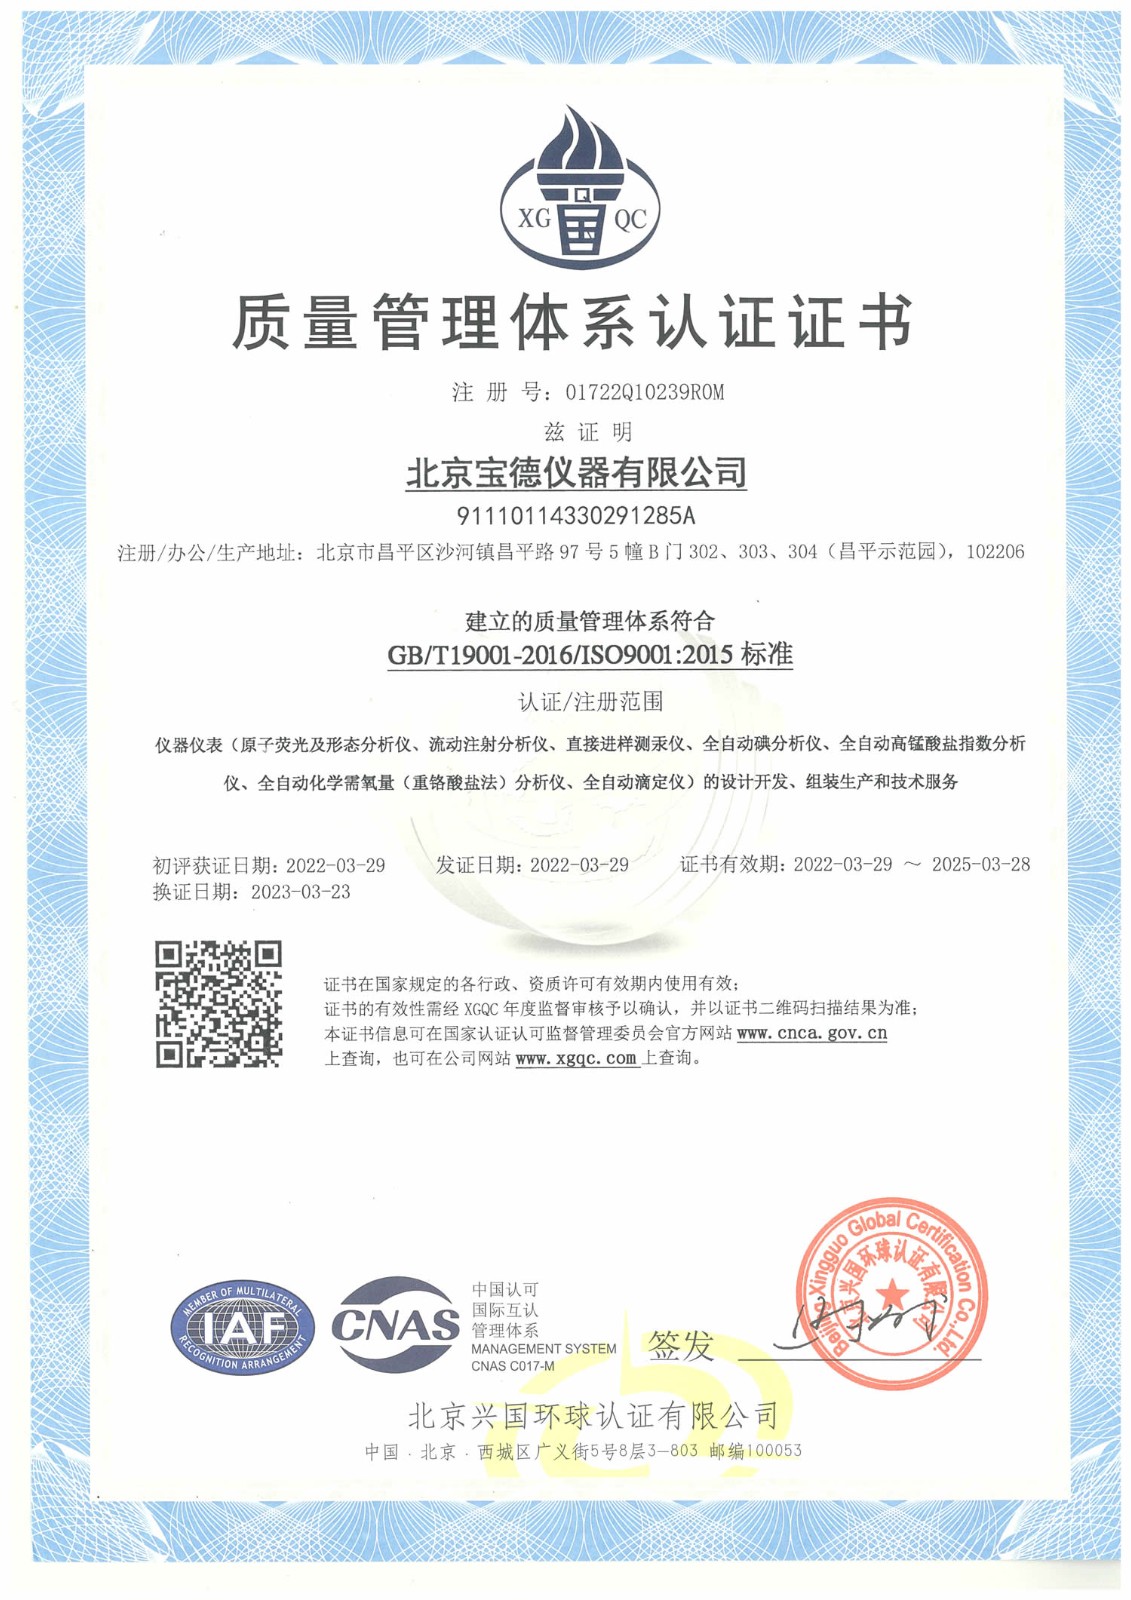 ISO9001 International Quality System Certification CN